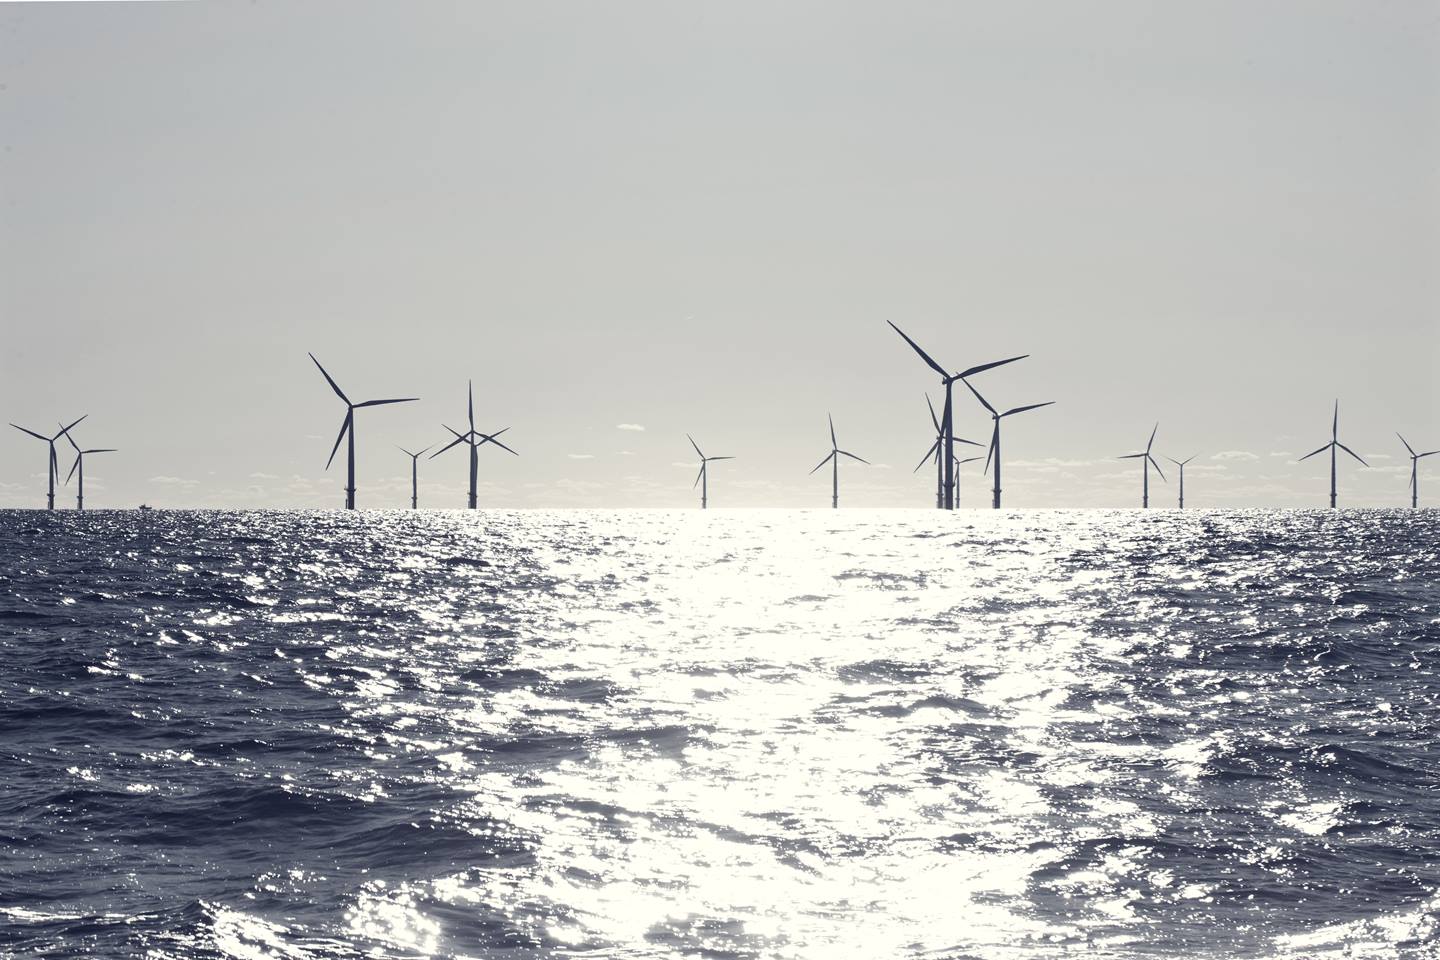 Lithuania opens with 700 MW offshore wind pitch